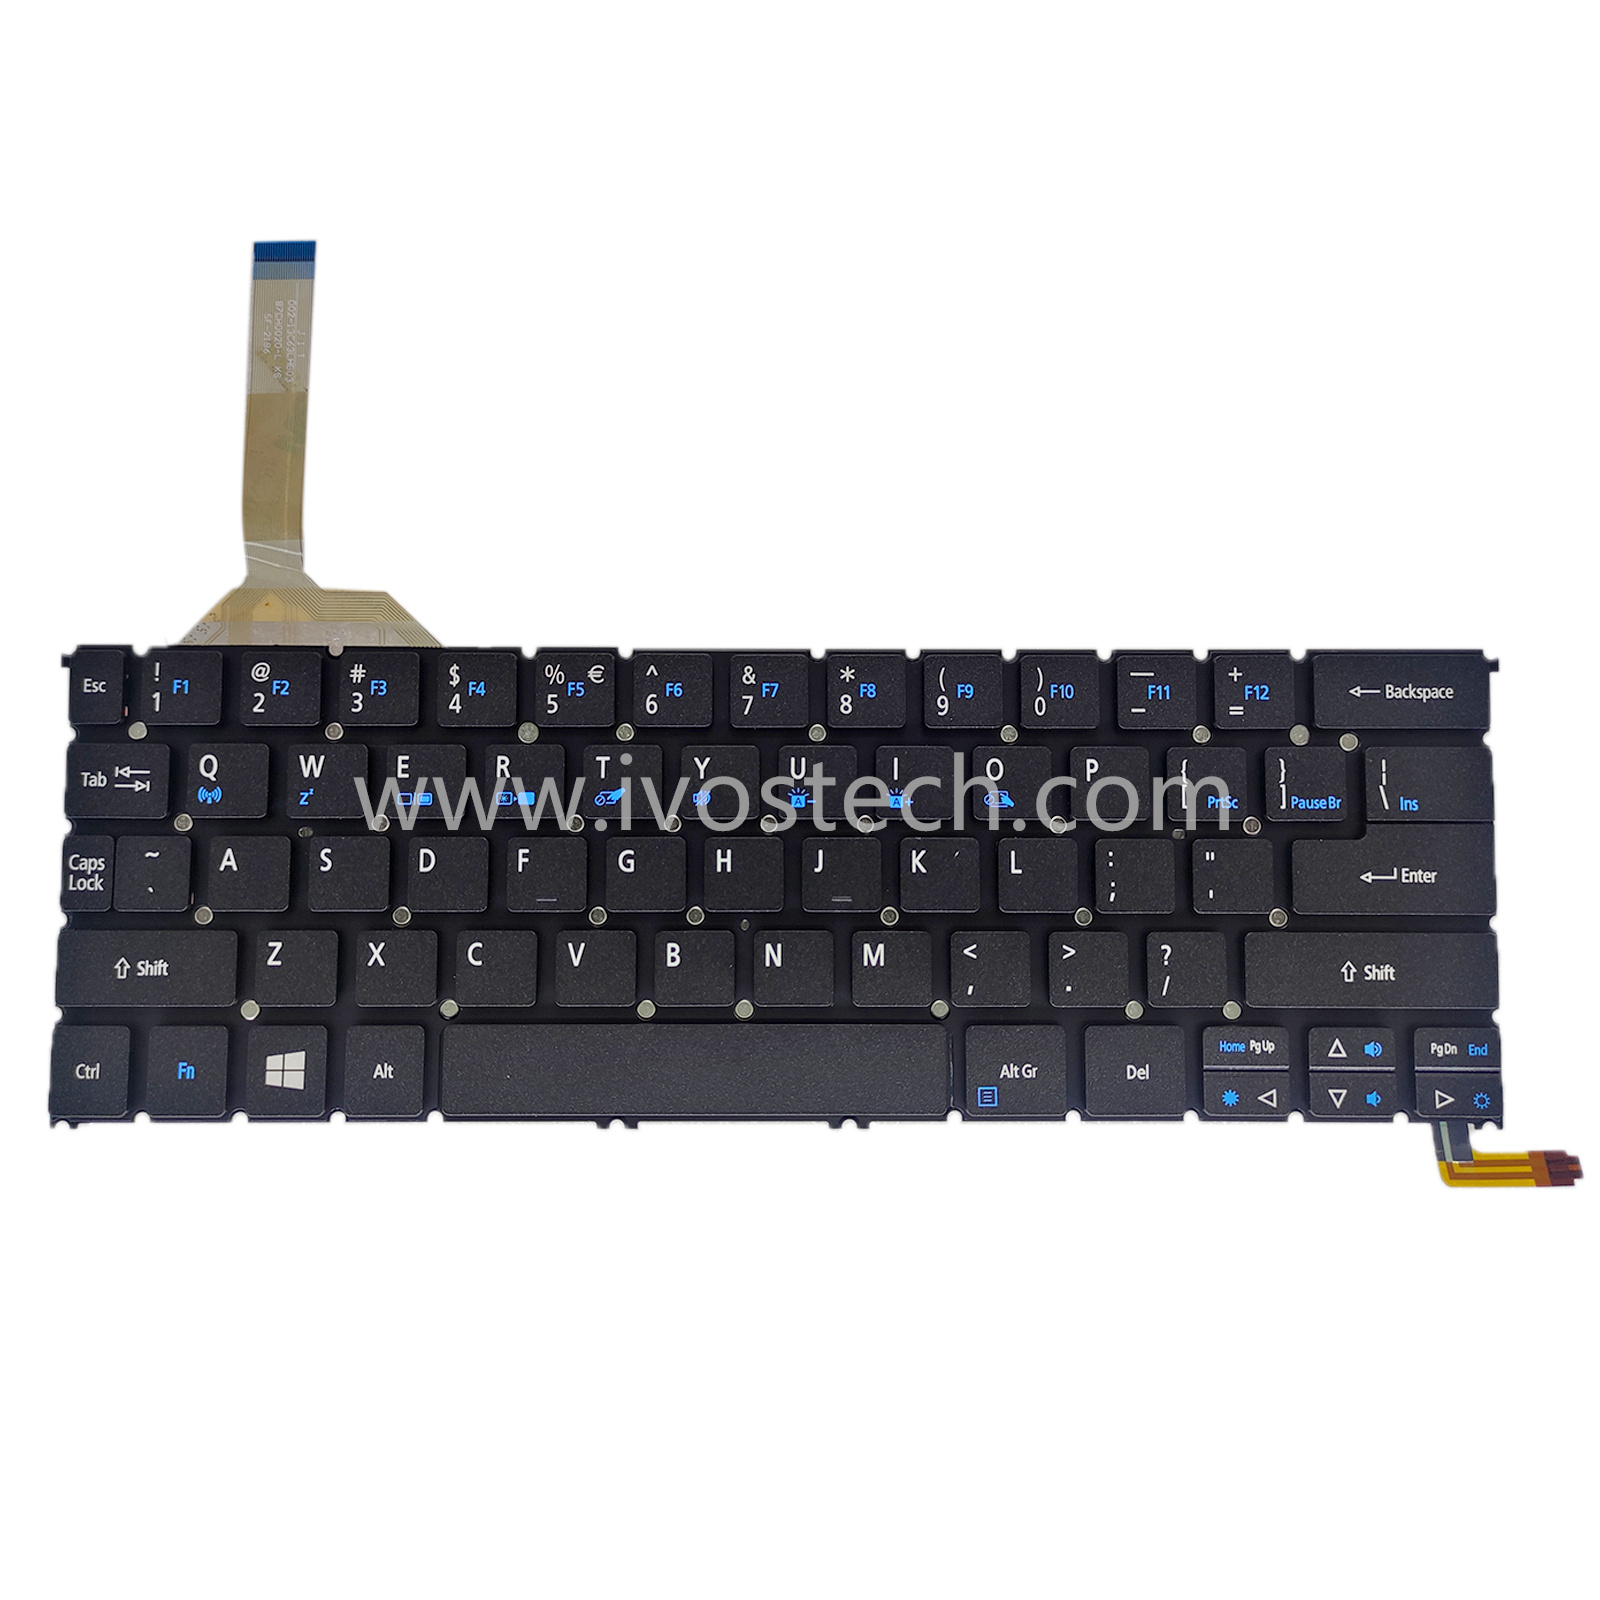 NKI1313007 Laptop Replacement Keyboard with Backlit for Acer Aspire R13 R7-371 – US Layout English